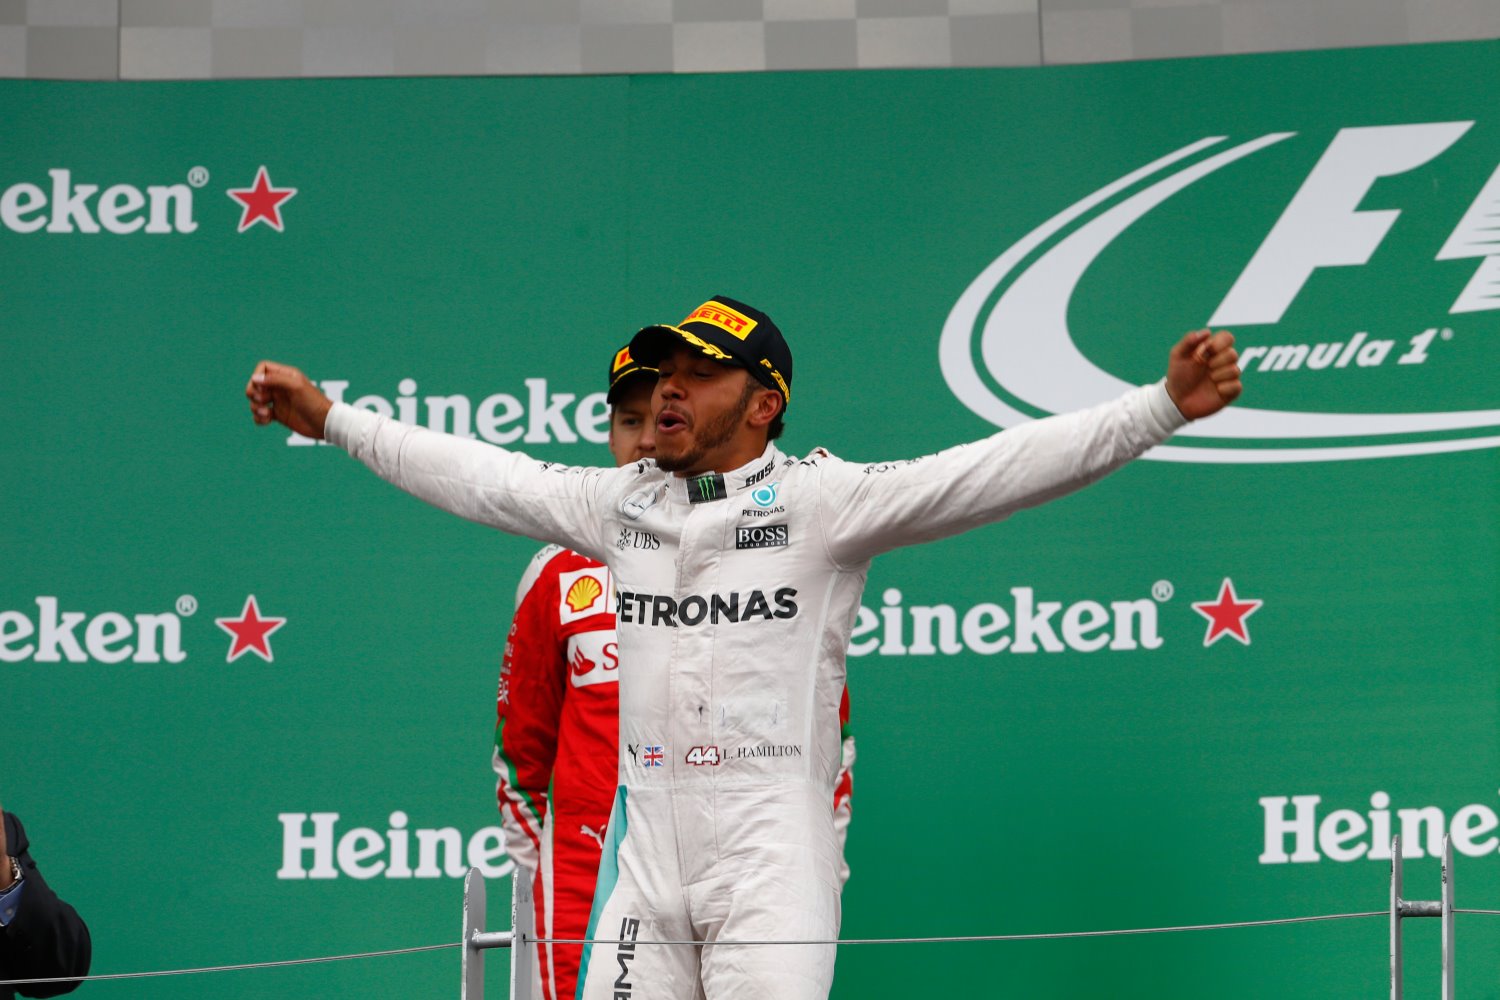 Heineken will be plastered all over F1 race tracks and podiums going forward